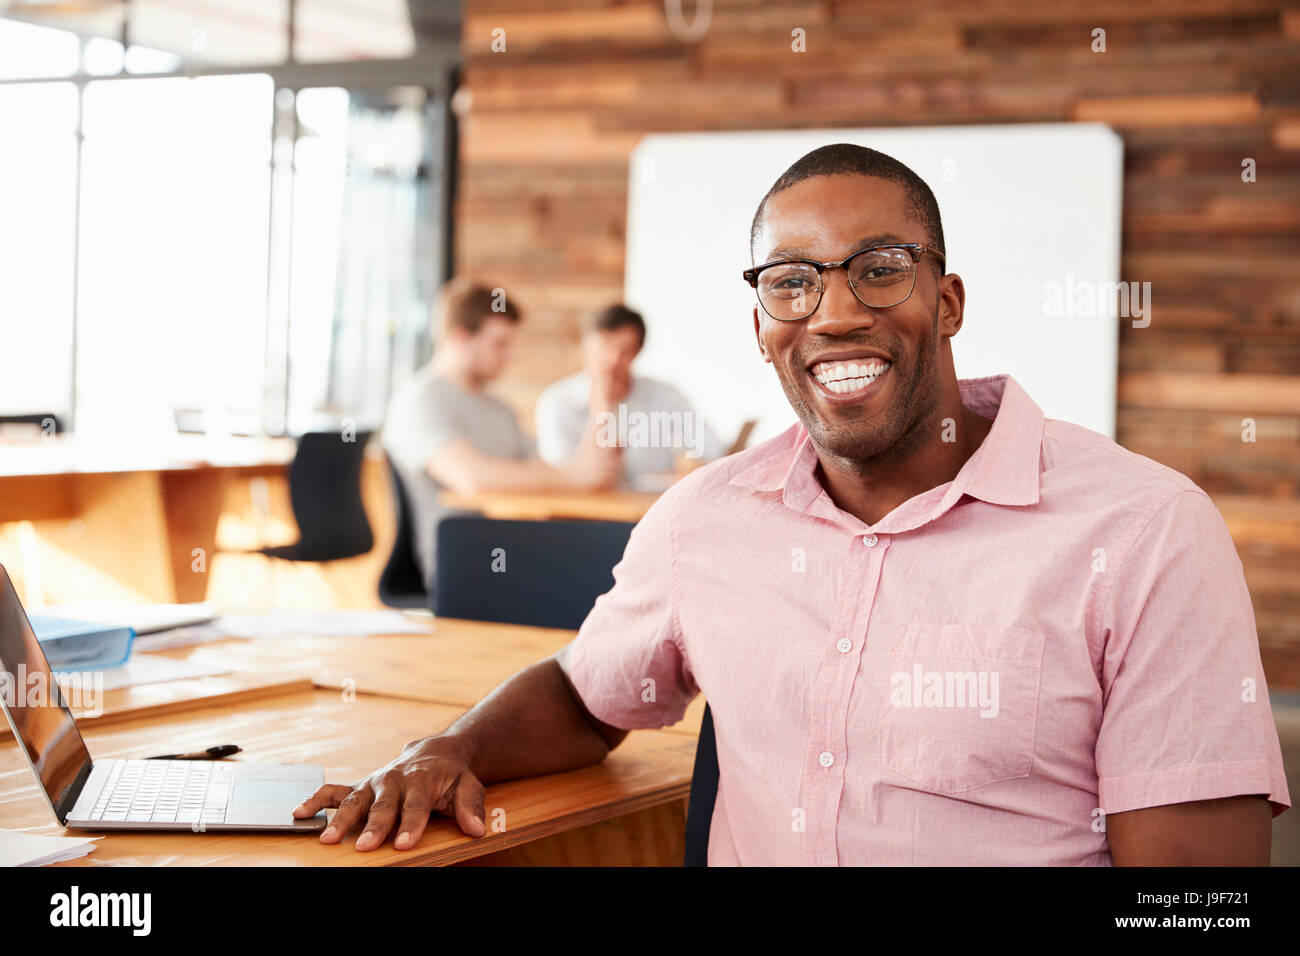 Black Man Face Stock Photos and Images - 123RF